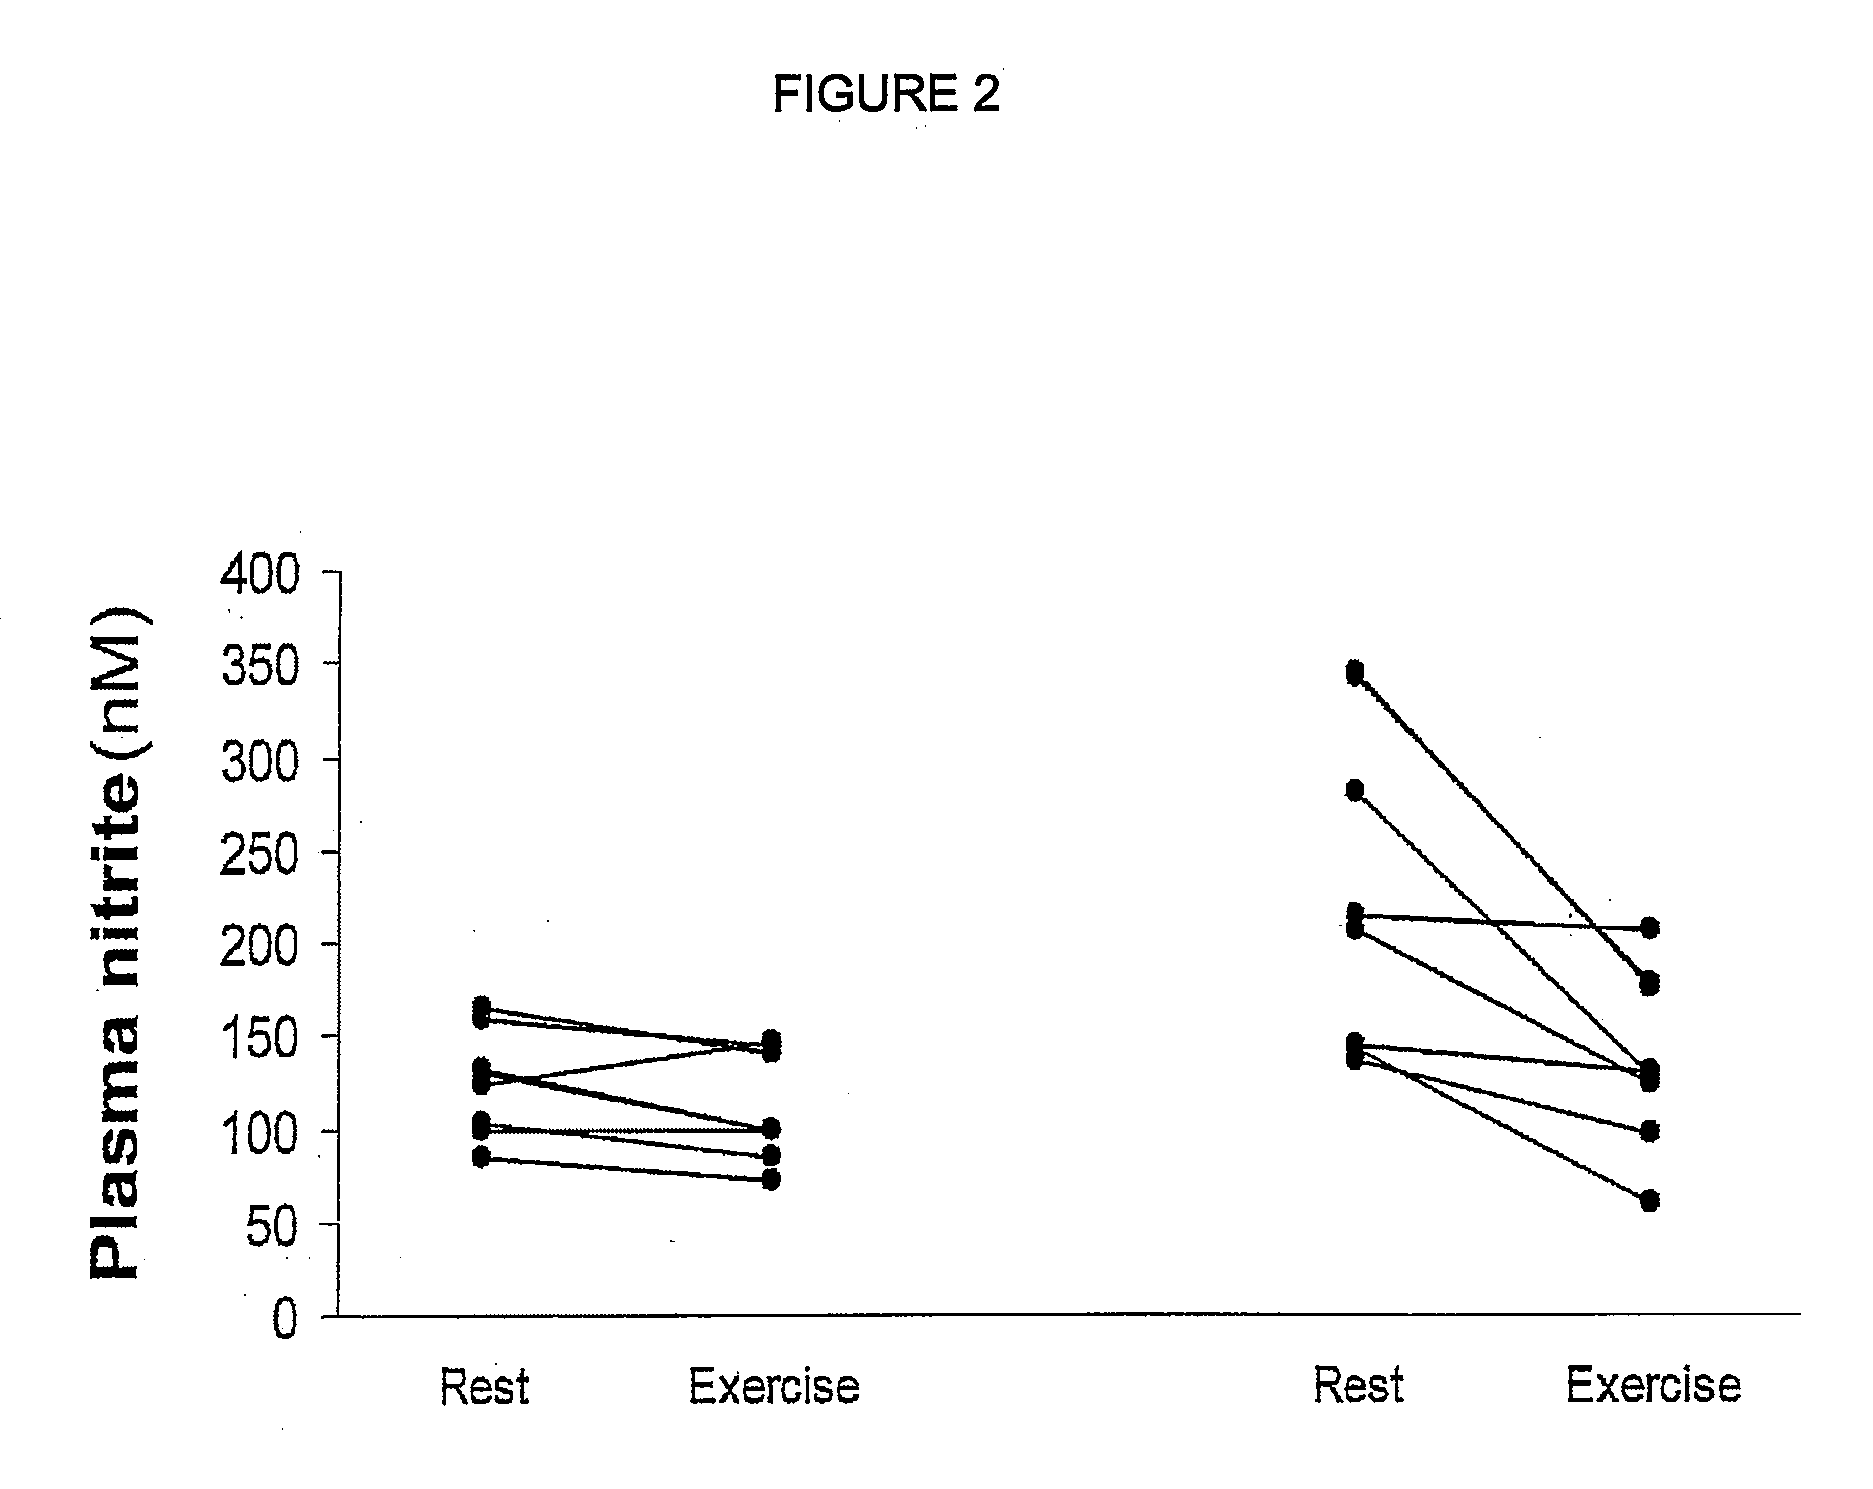 Performance enhancing composition and use thereof